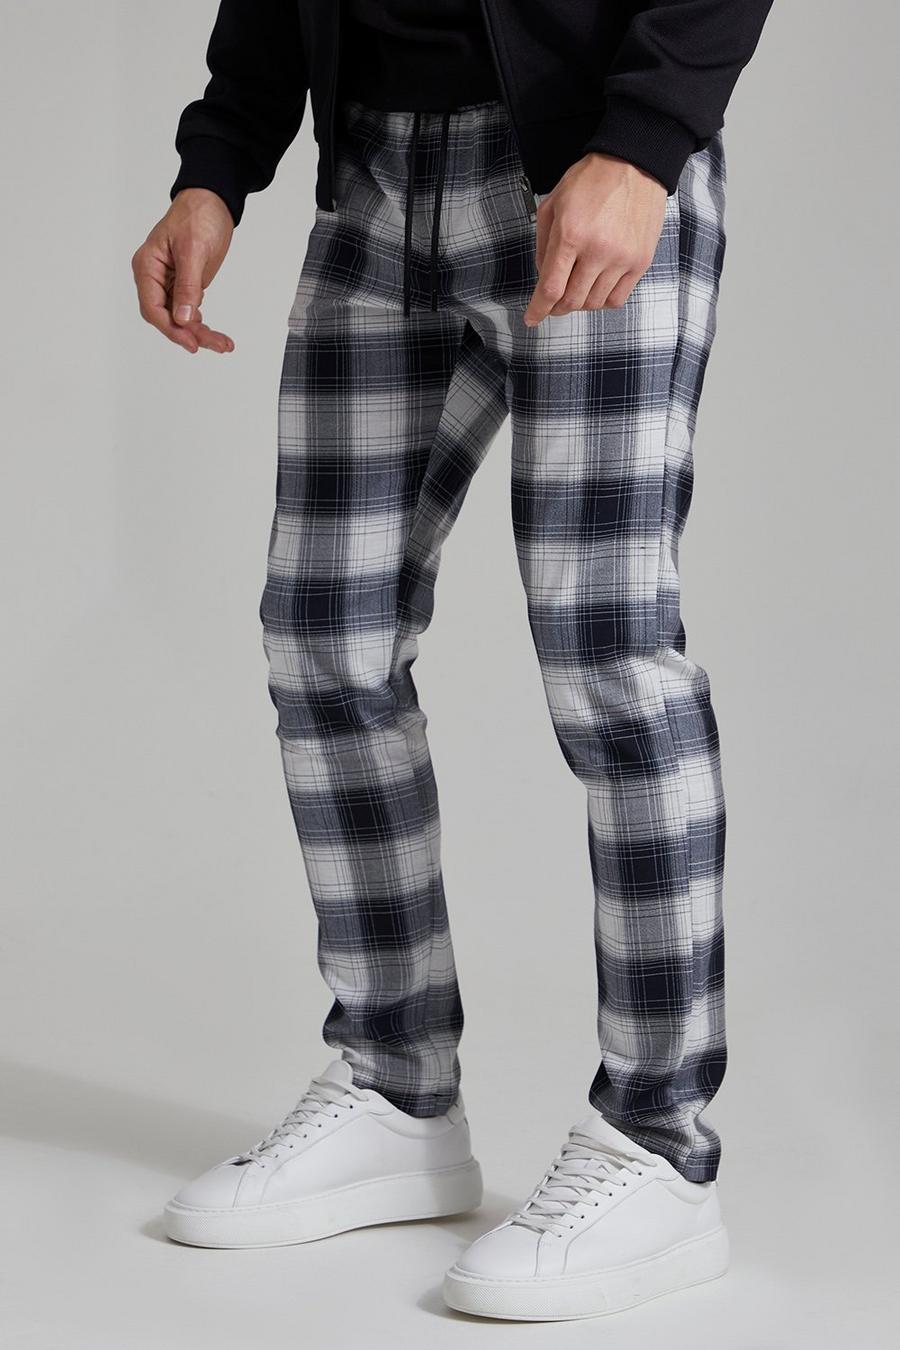 Mens Party Trousers | boohoo UK